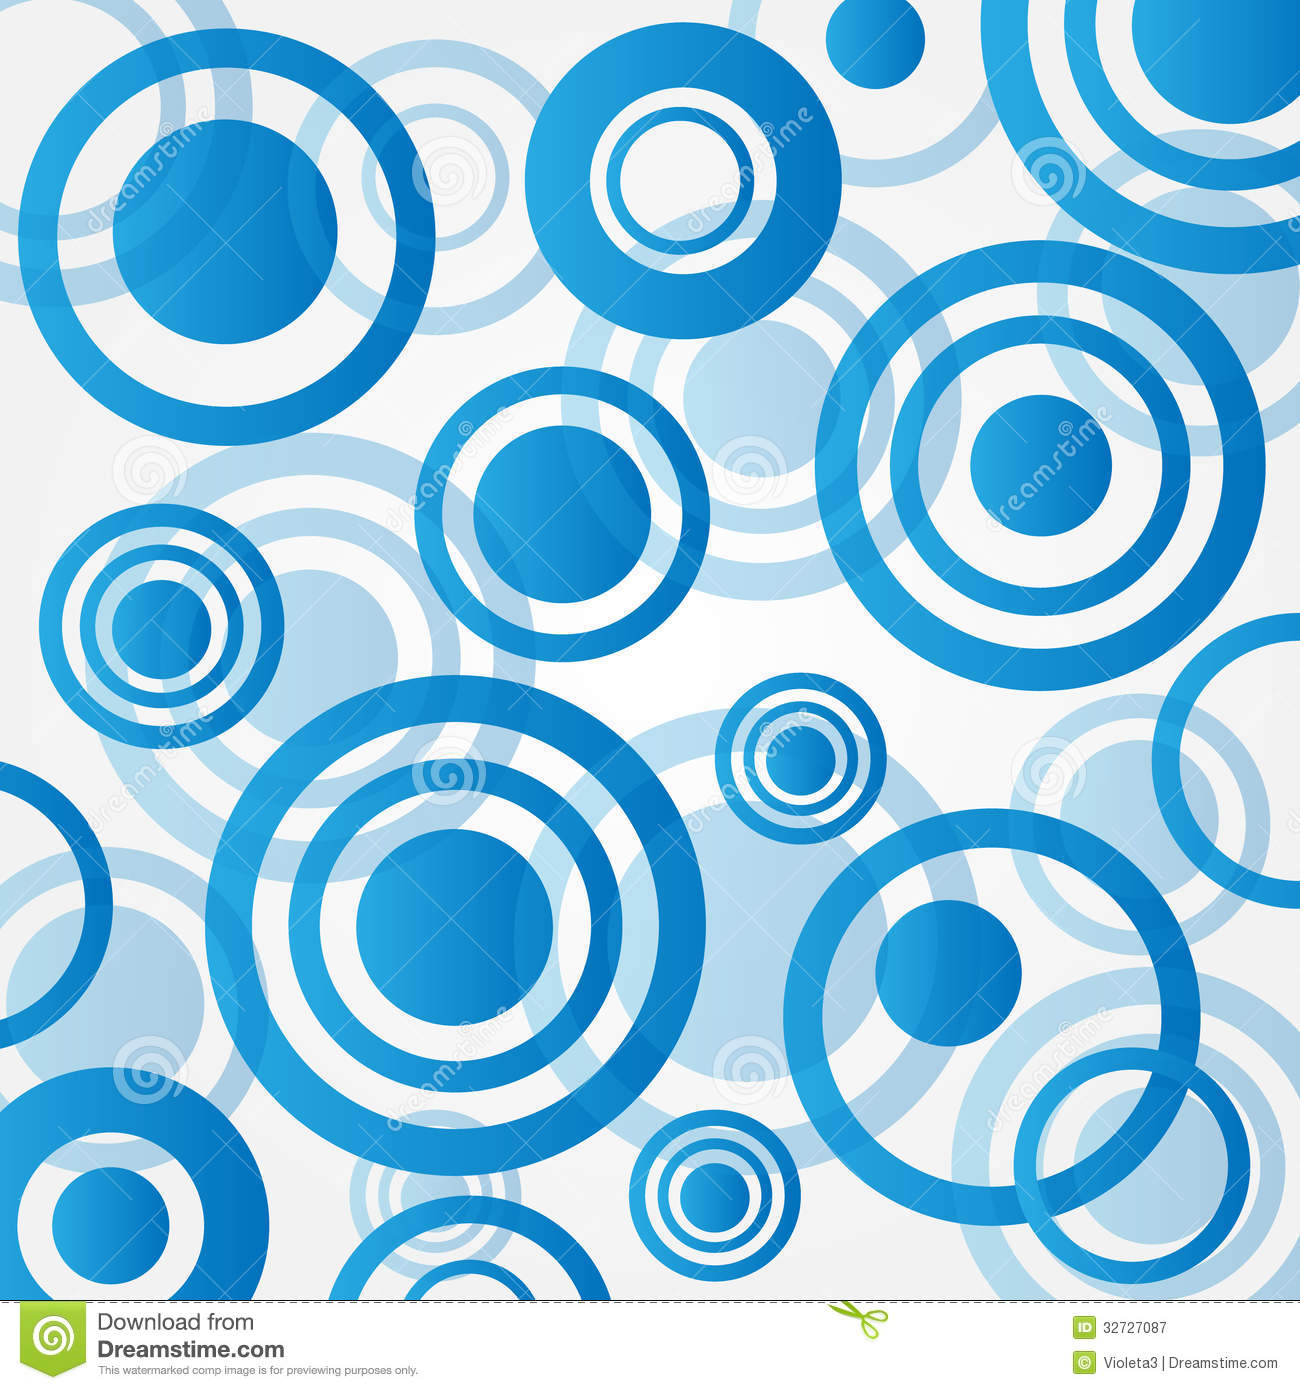 Cool Circle Abstract Shape Wallpapers